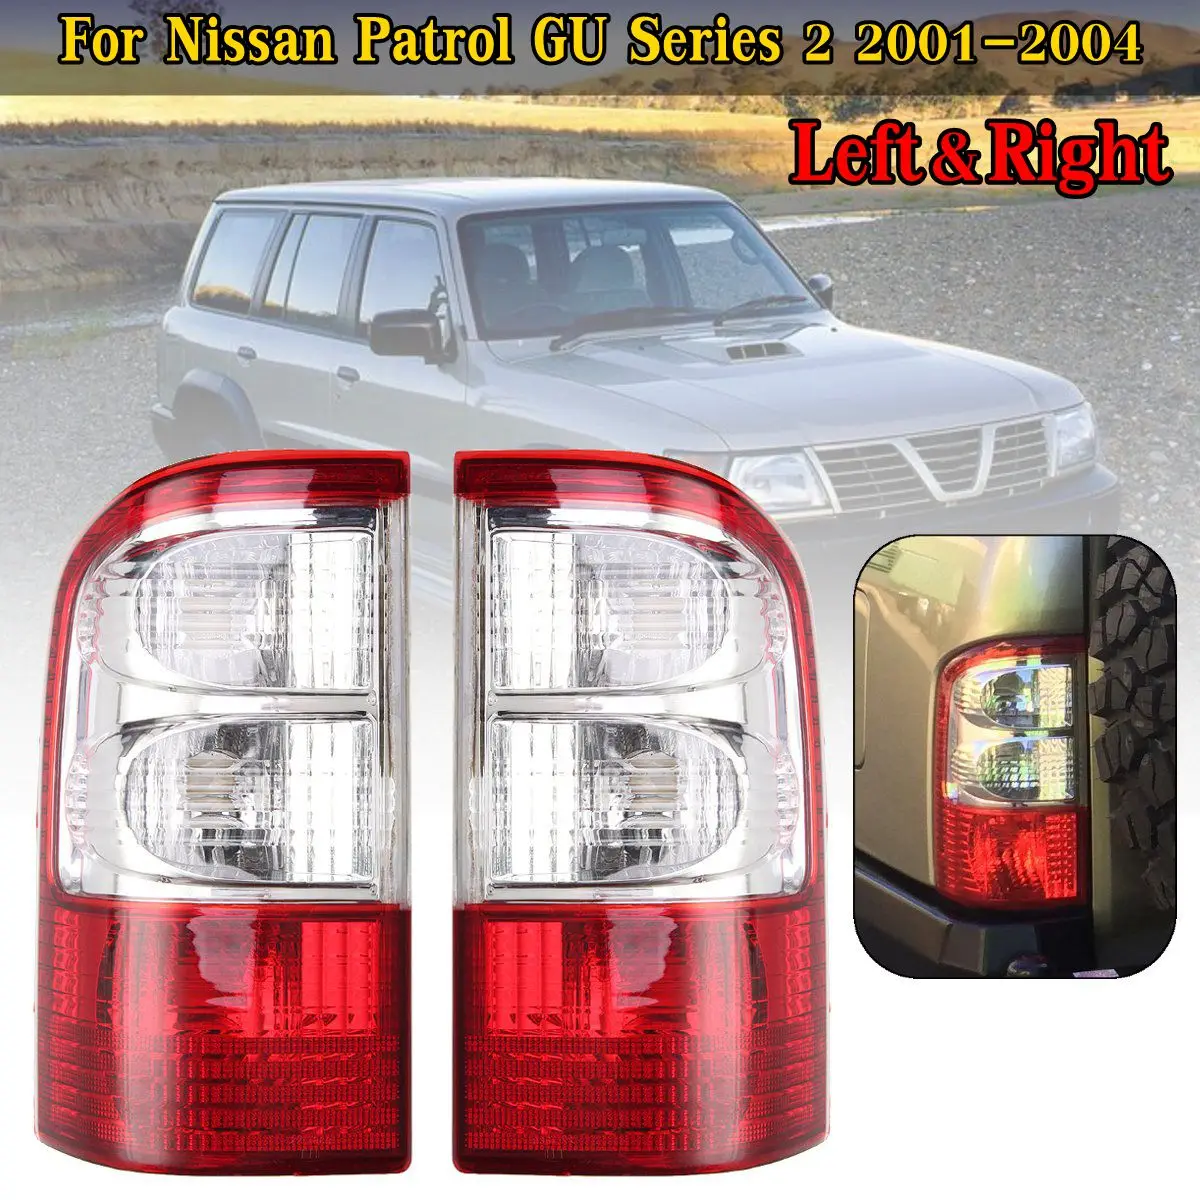 12 V Rear Tail Light For Nissan Patrol GU Series 2 2001 2002 2003 2004 Brake Lamp ABS Tail Light Lamp Without Wire Harness